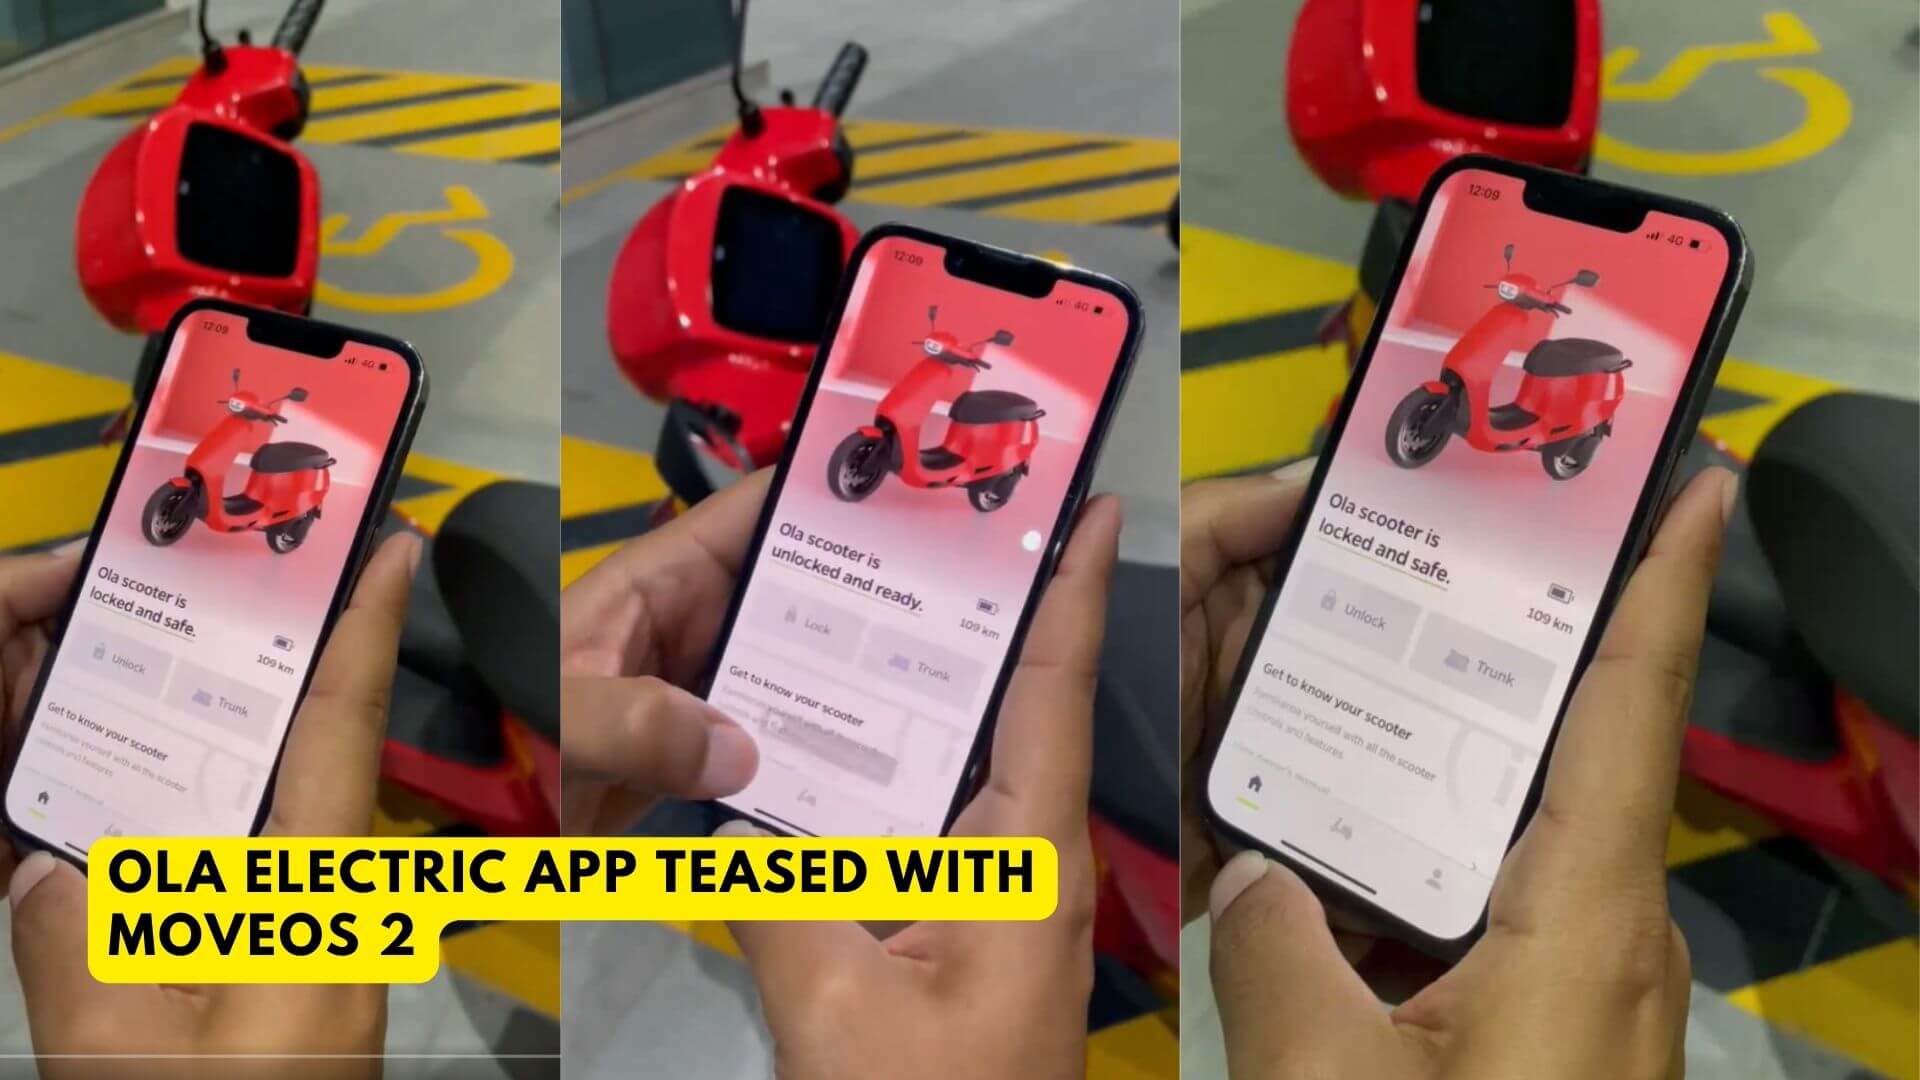 https://e-vehicleinfo.com/ola-electric-app-teased-with-moveos-2/